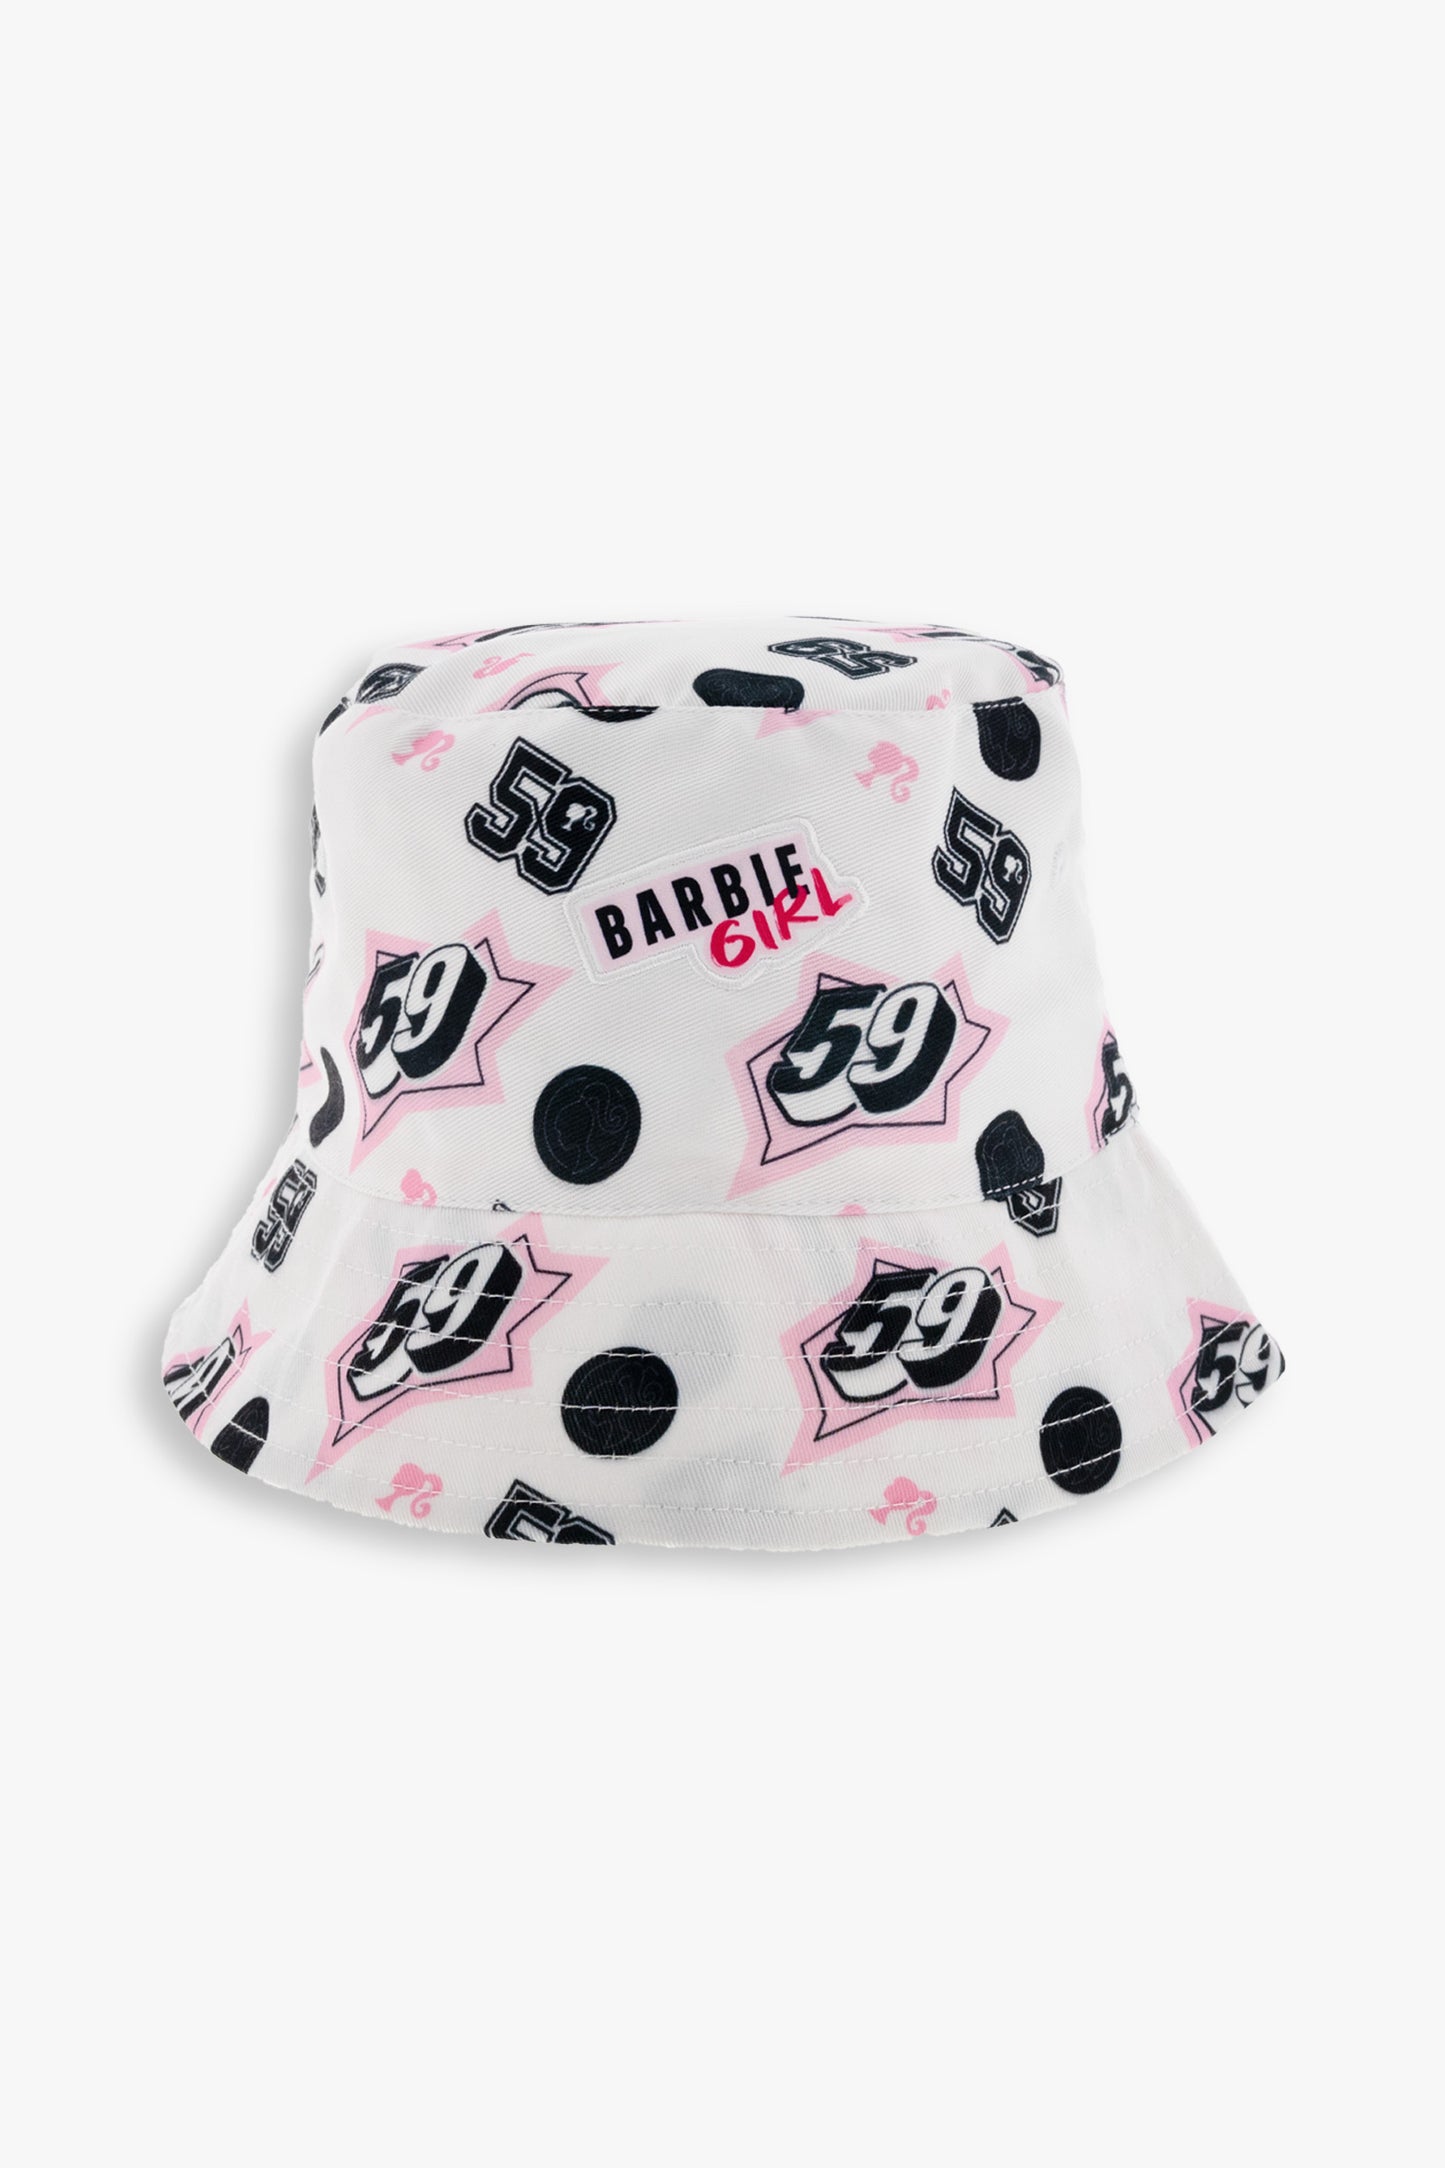 Barbie Youth Girls Bucket Hat With Embroidered Edge